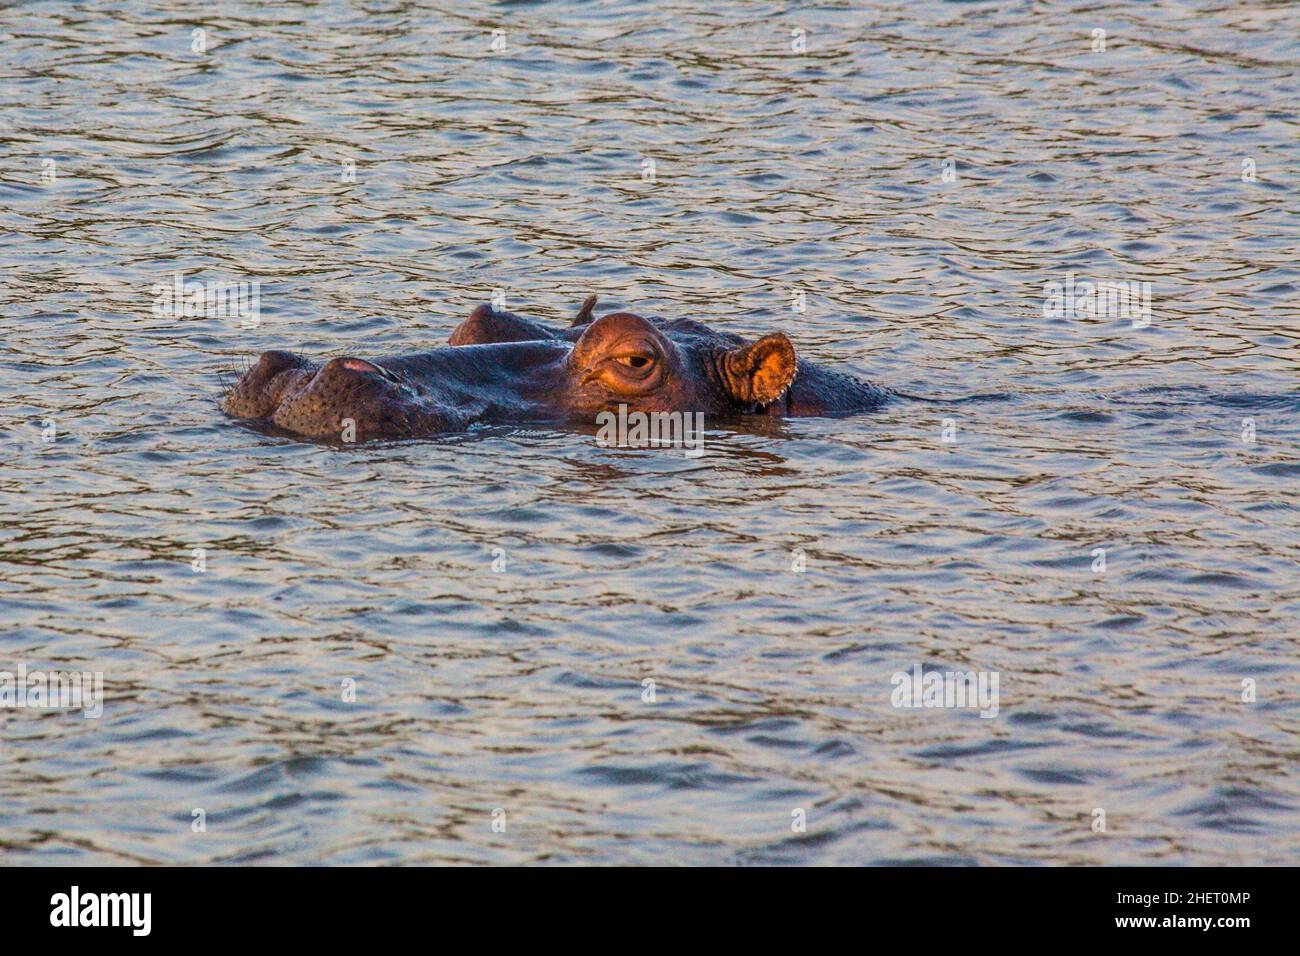 Hippo in the evening light, Lake St. Lucia, iSimangaliso Wetland Park, South Africa Stock Photo